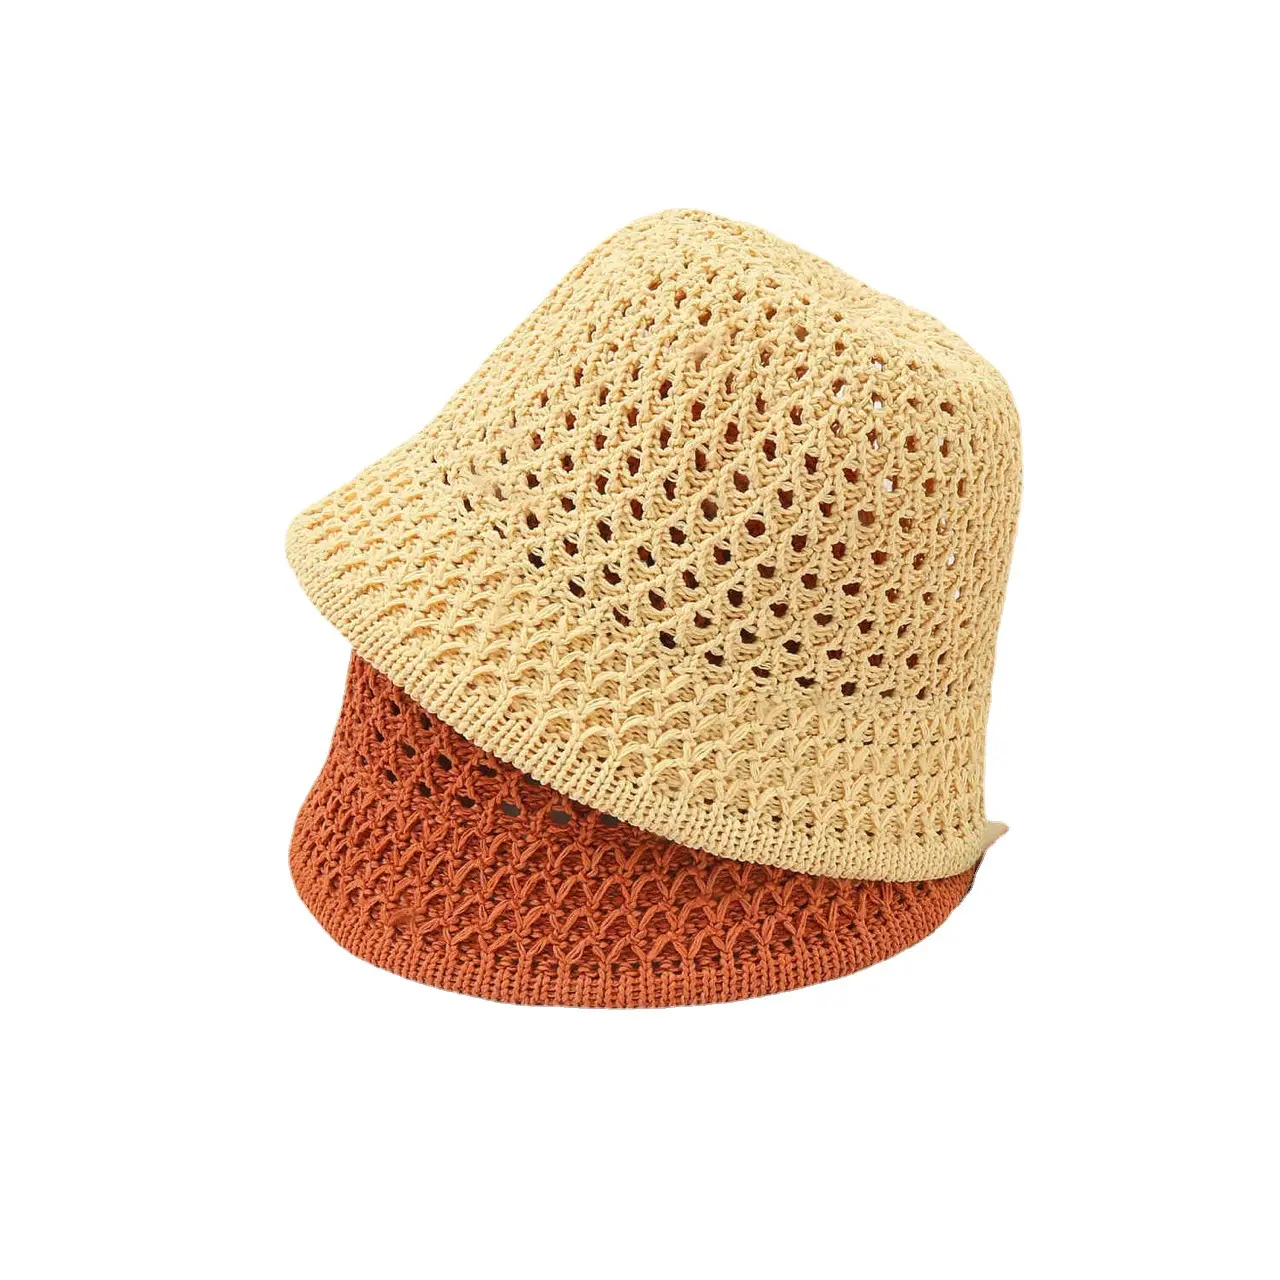 New style spring and summer day hollow sunshade hat woven straw hat fisherman hat woman